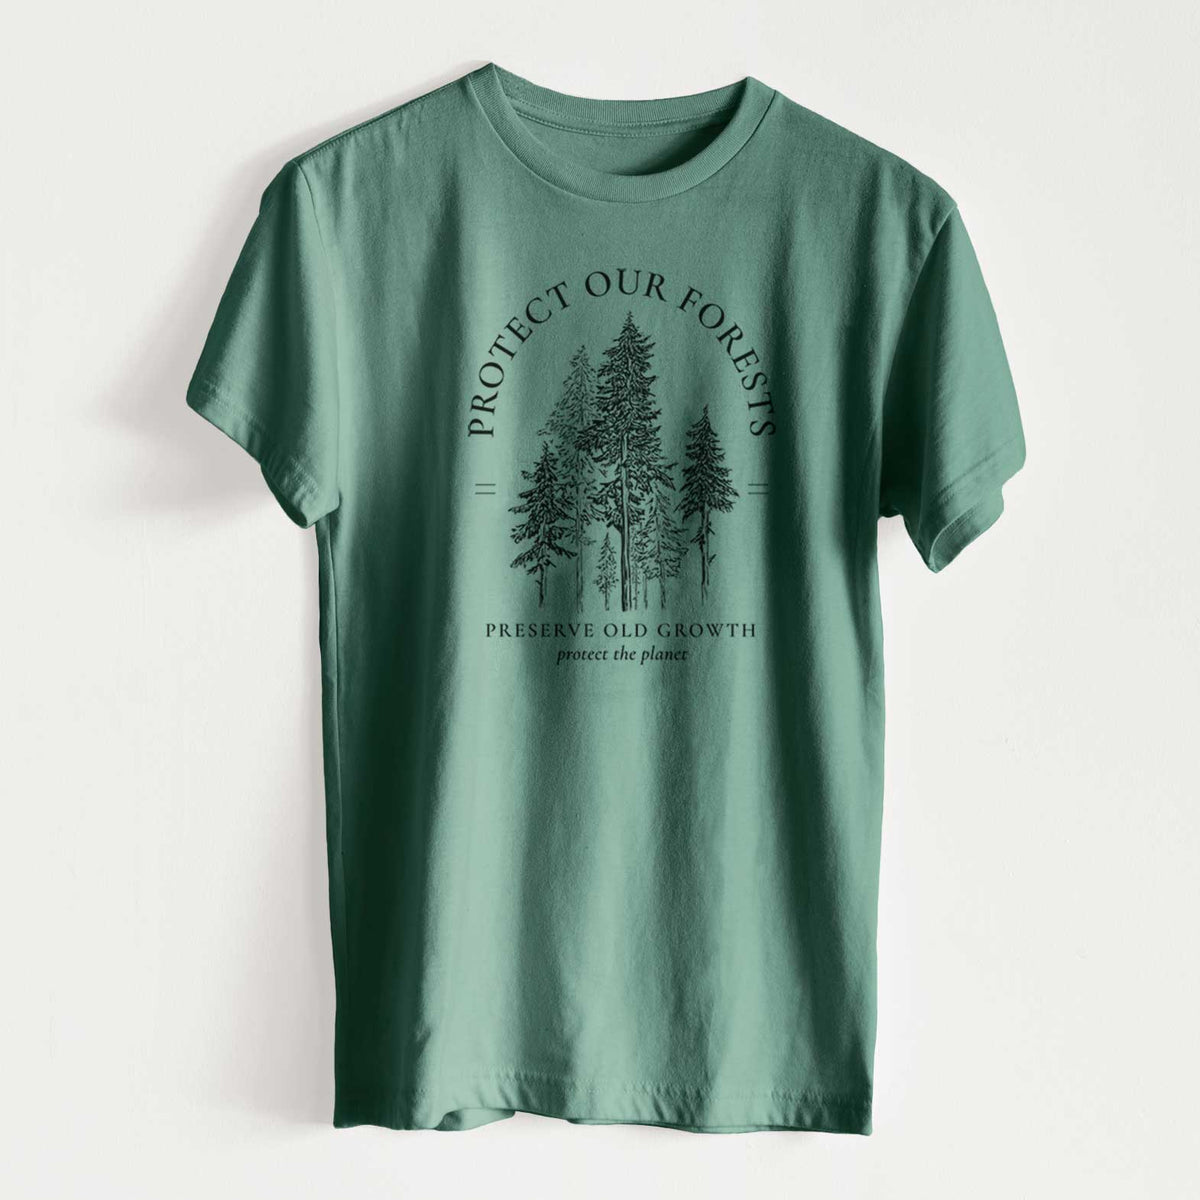 Protect our Forests - Preserve Old Growth - Unisex Recycled Eco Tee  - CLOSEOUT - FINAL SALE